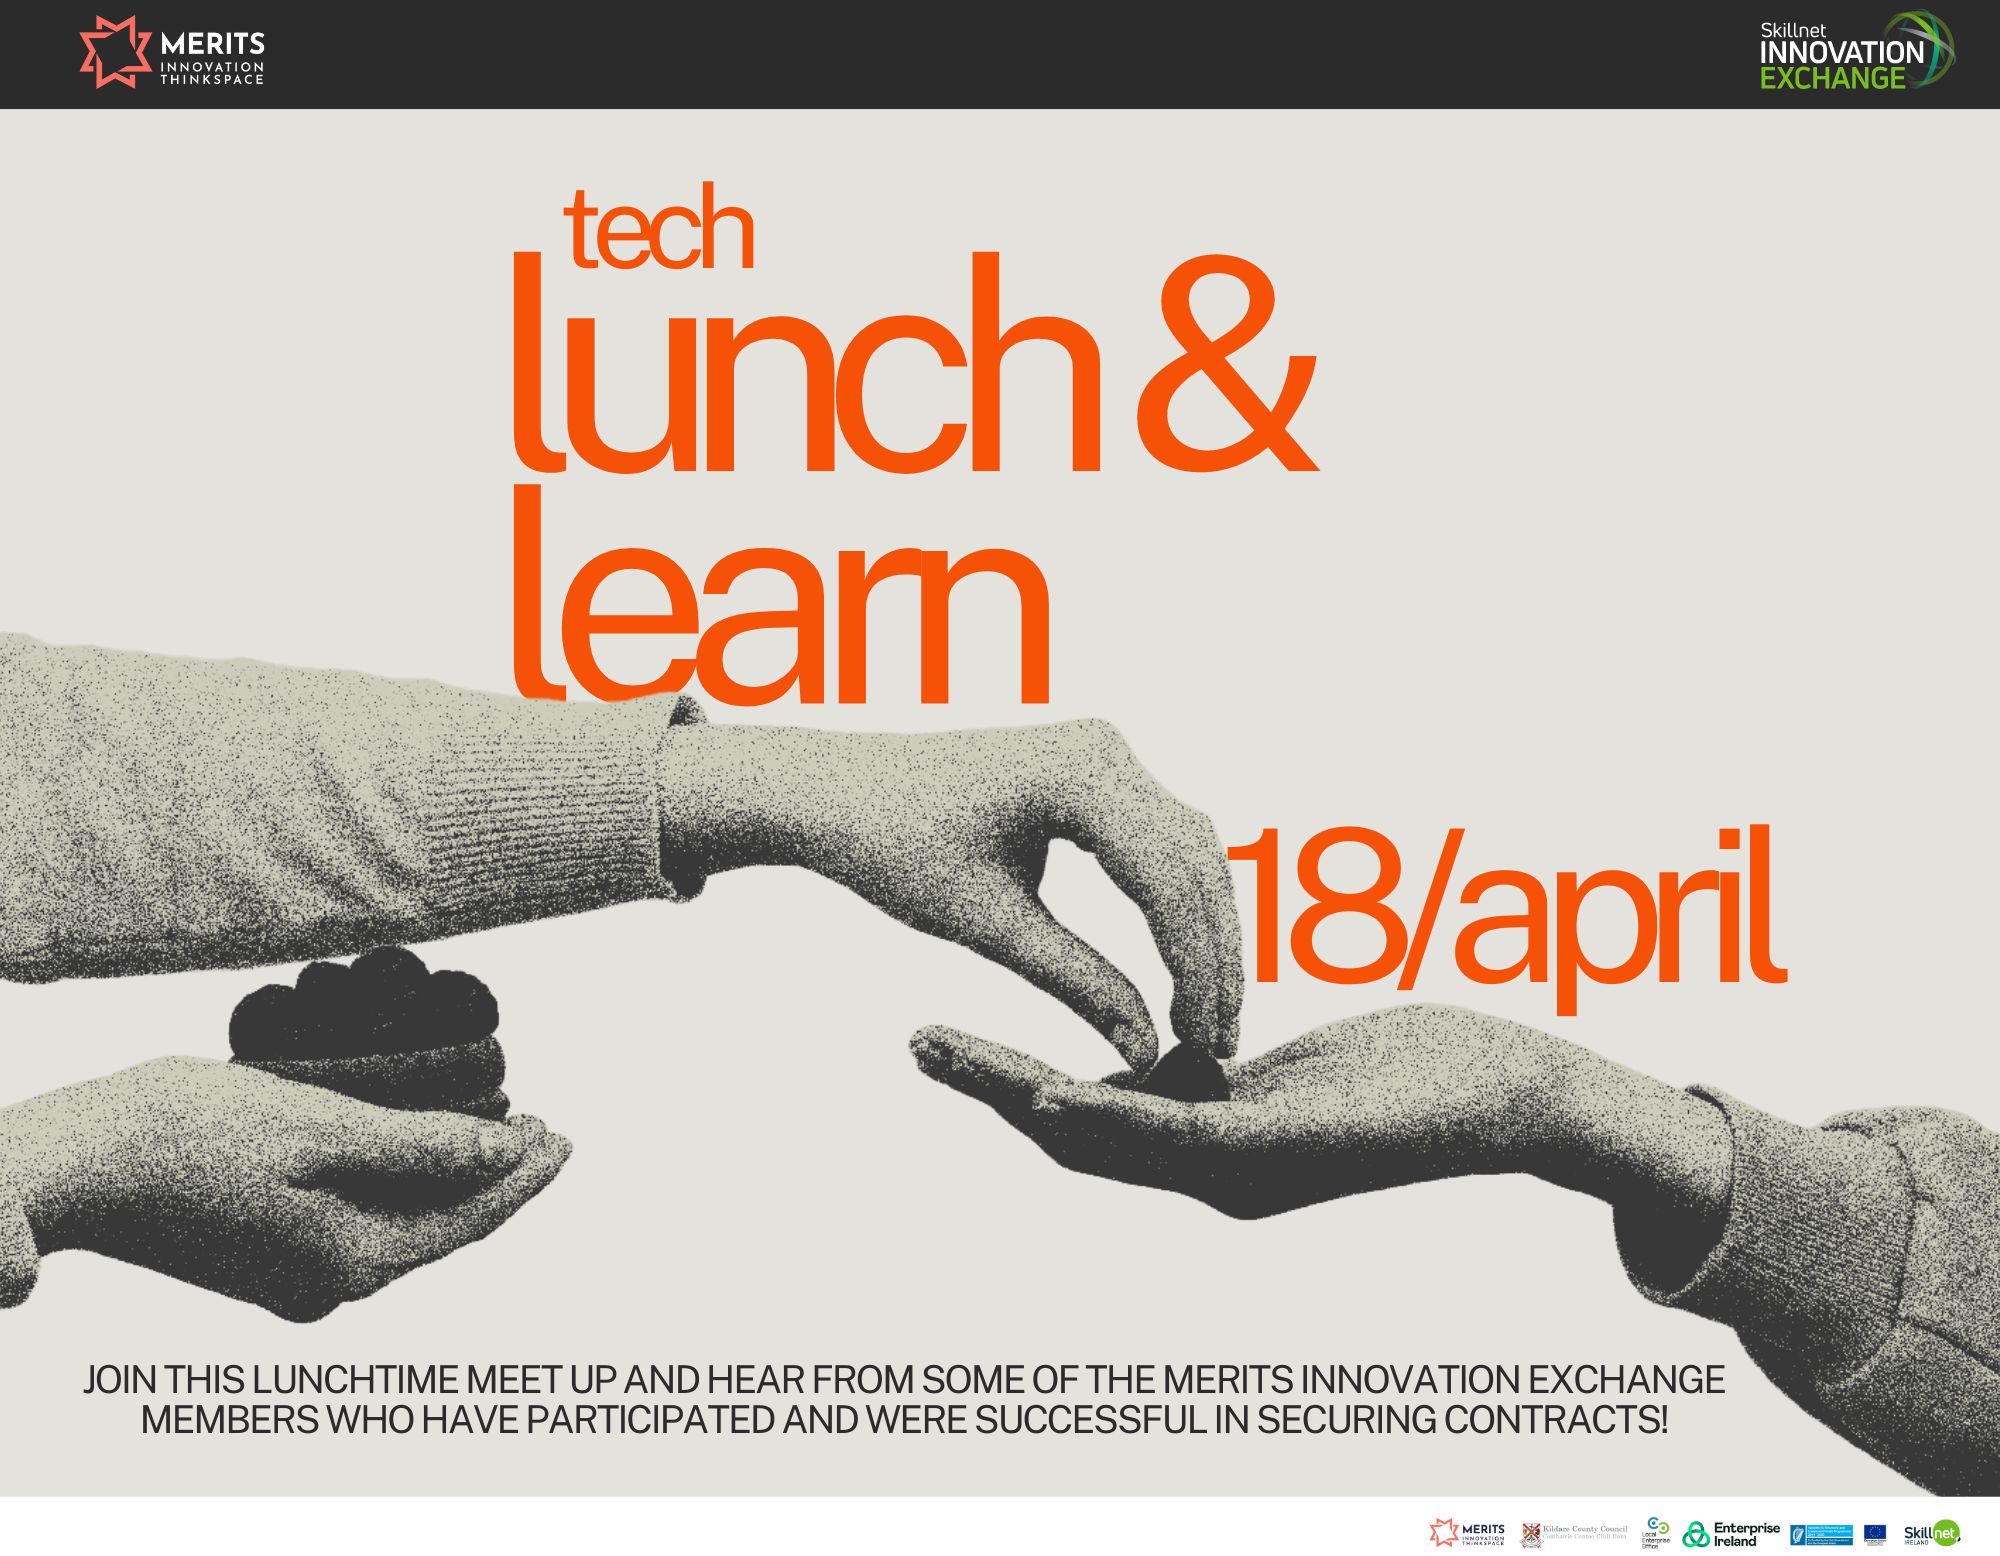 Tech Lunch and Learn: Innovation Exchange